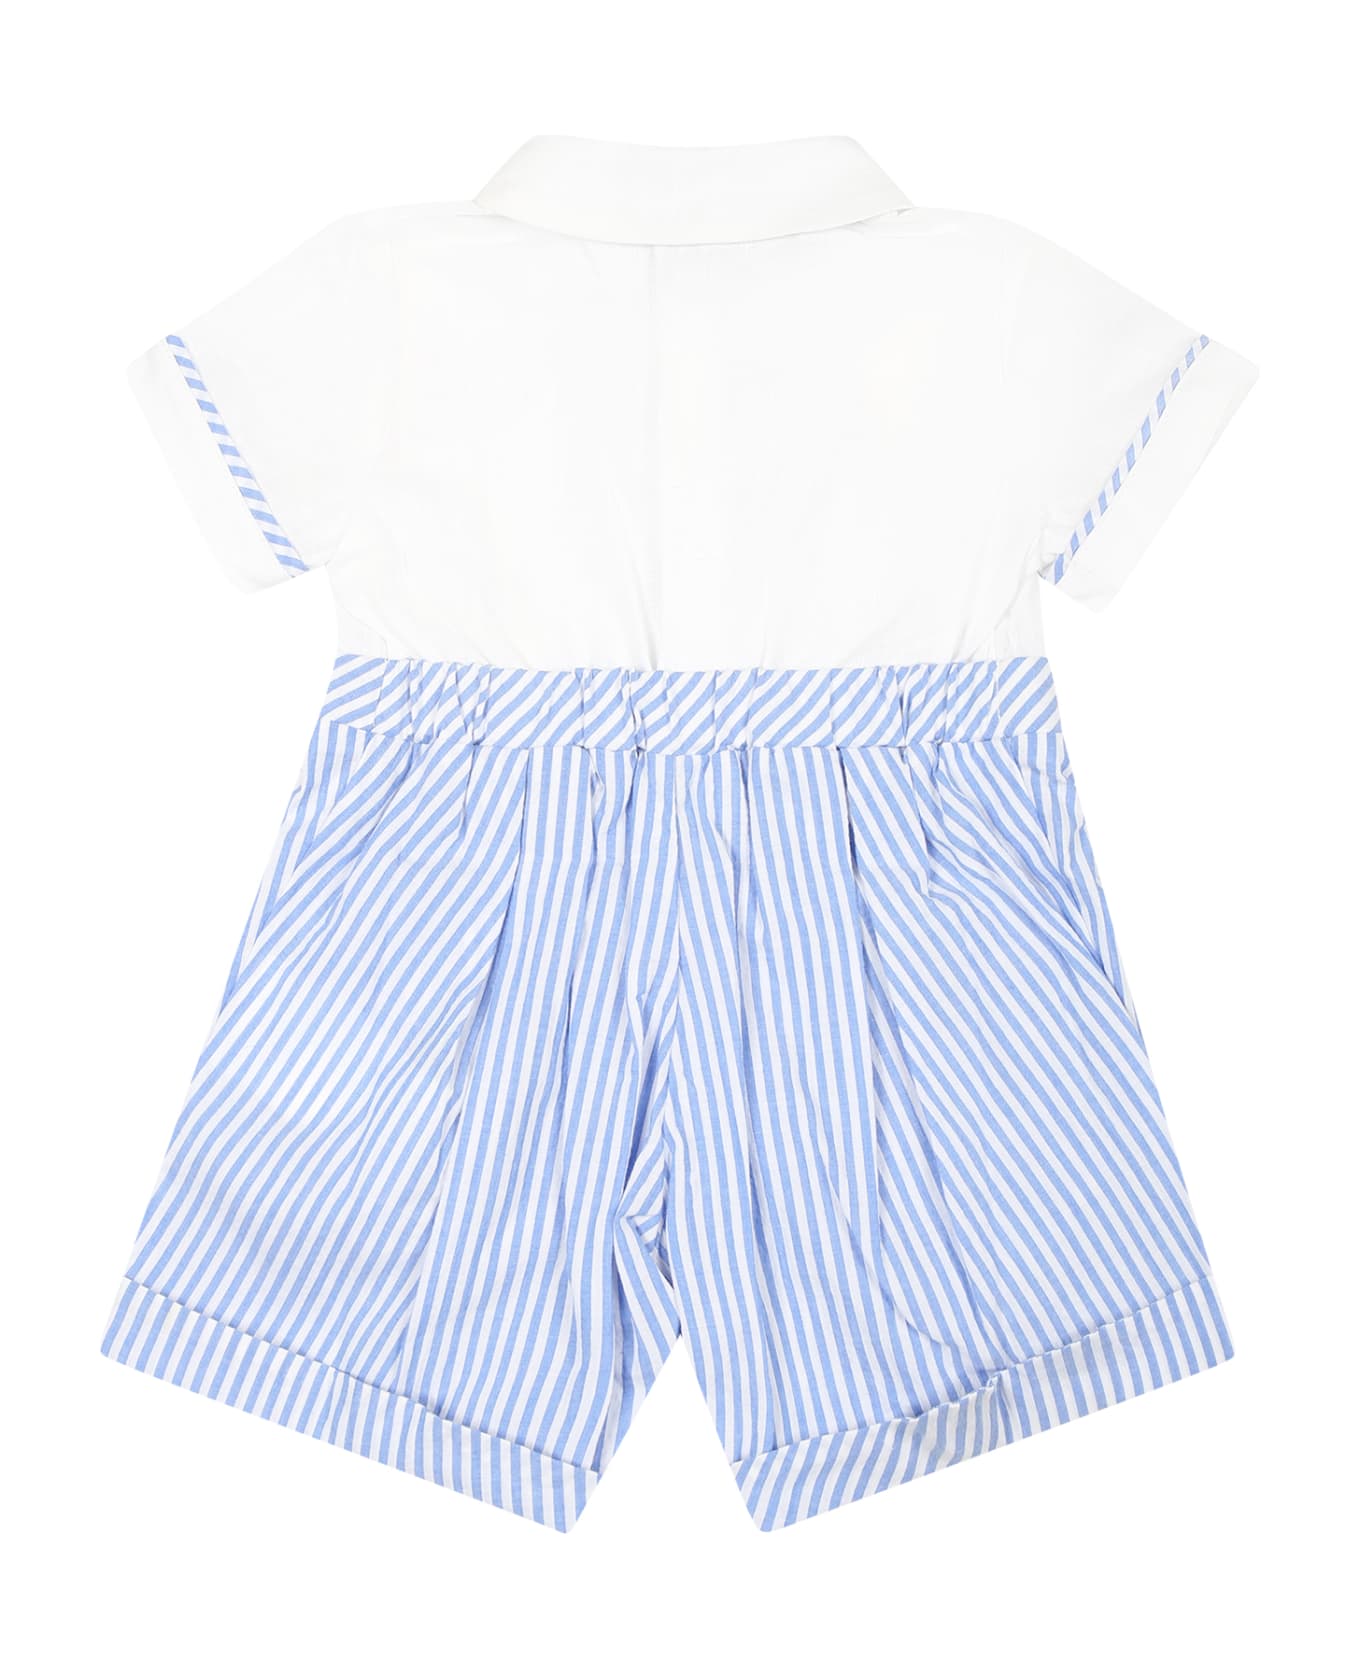 Monnalisa Light Blue Romper For Baby Boy With Bow Tie - White ボディスーツ＆セットアップ